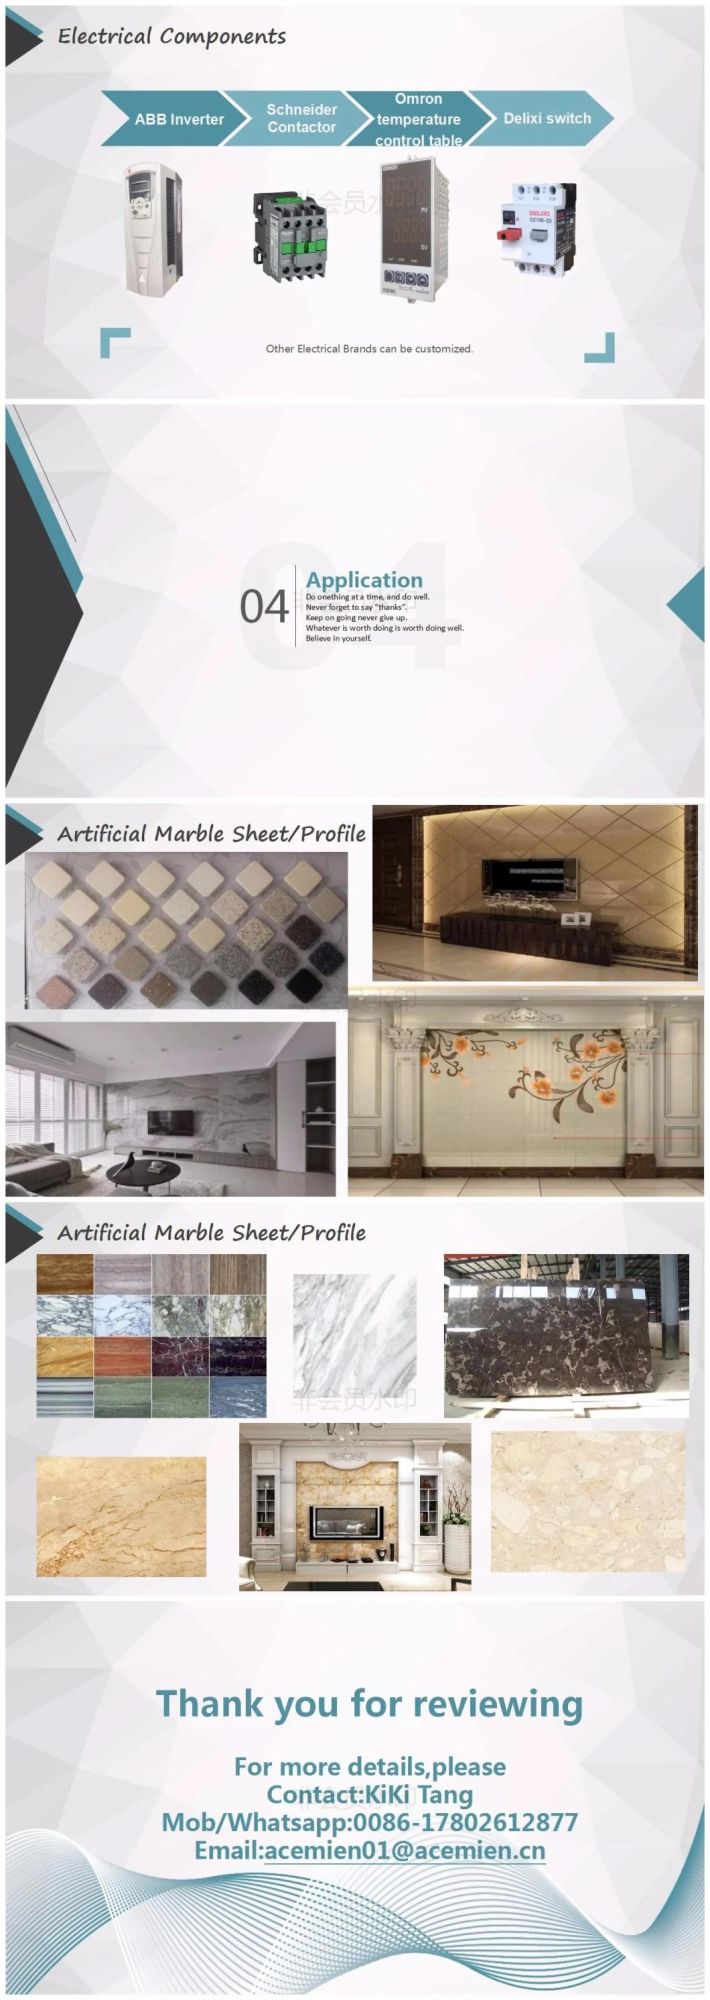 PVC Artificial Marble Board Making Machine / PVC Artificial Marble Sheet Production Line